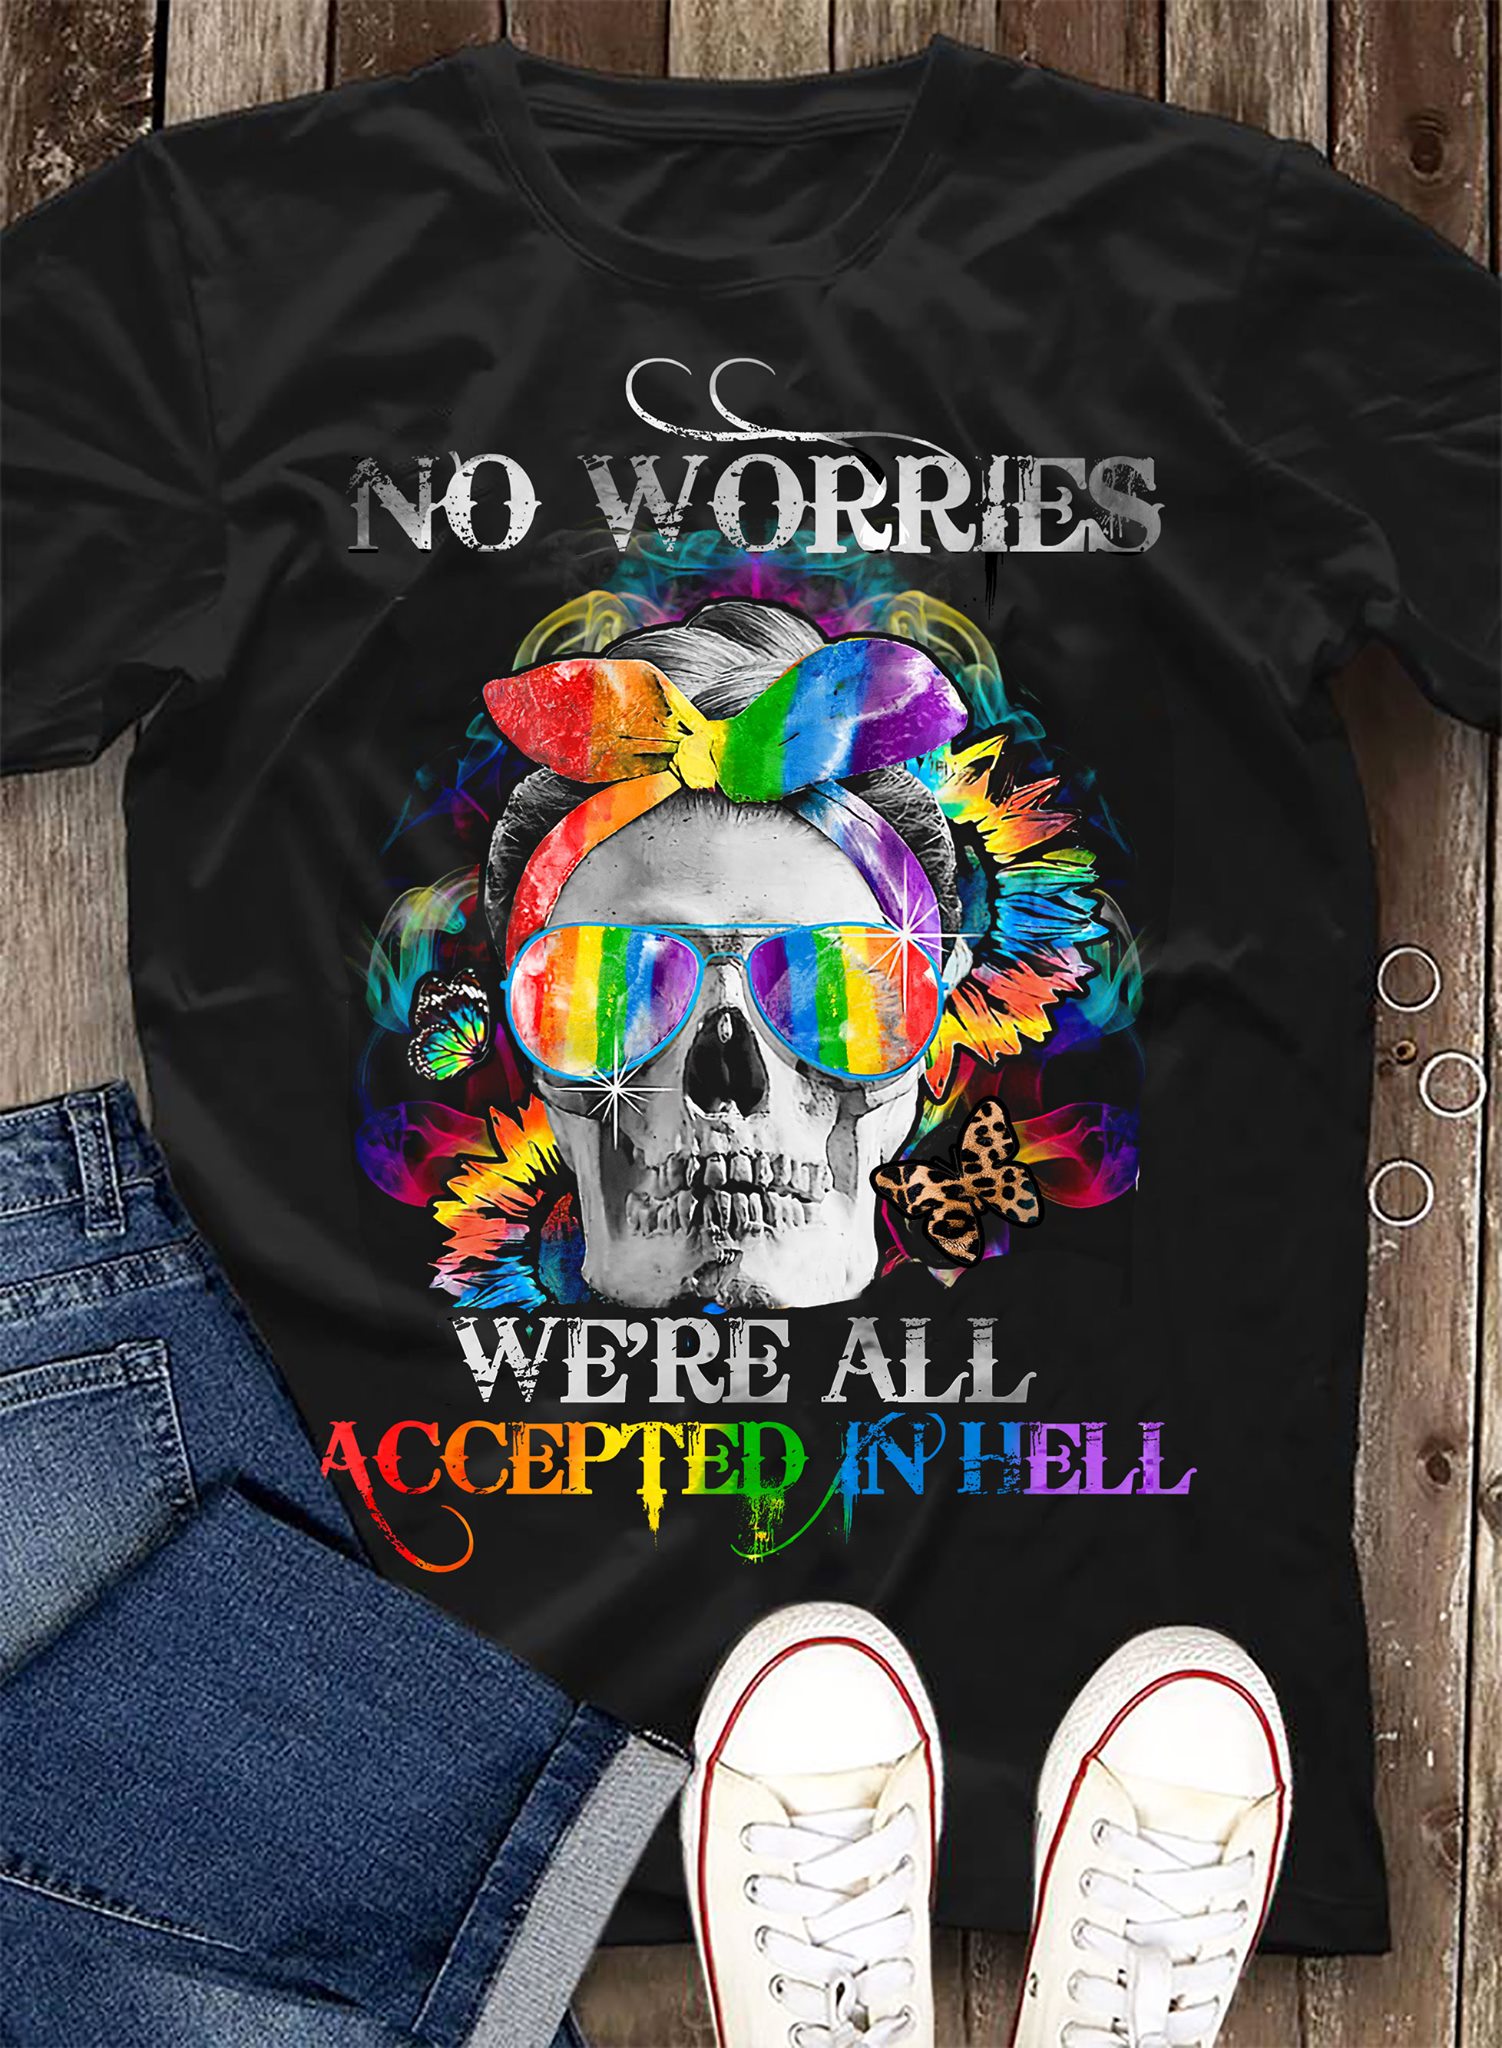 No worries we're all accepted in hell - Lgbt community